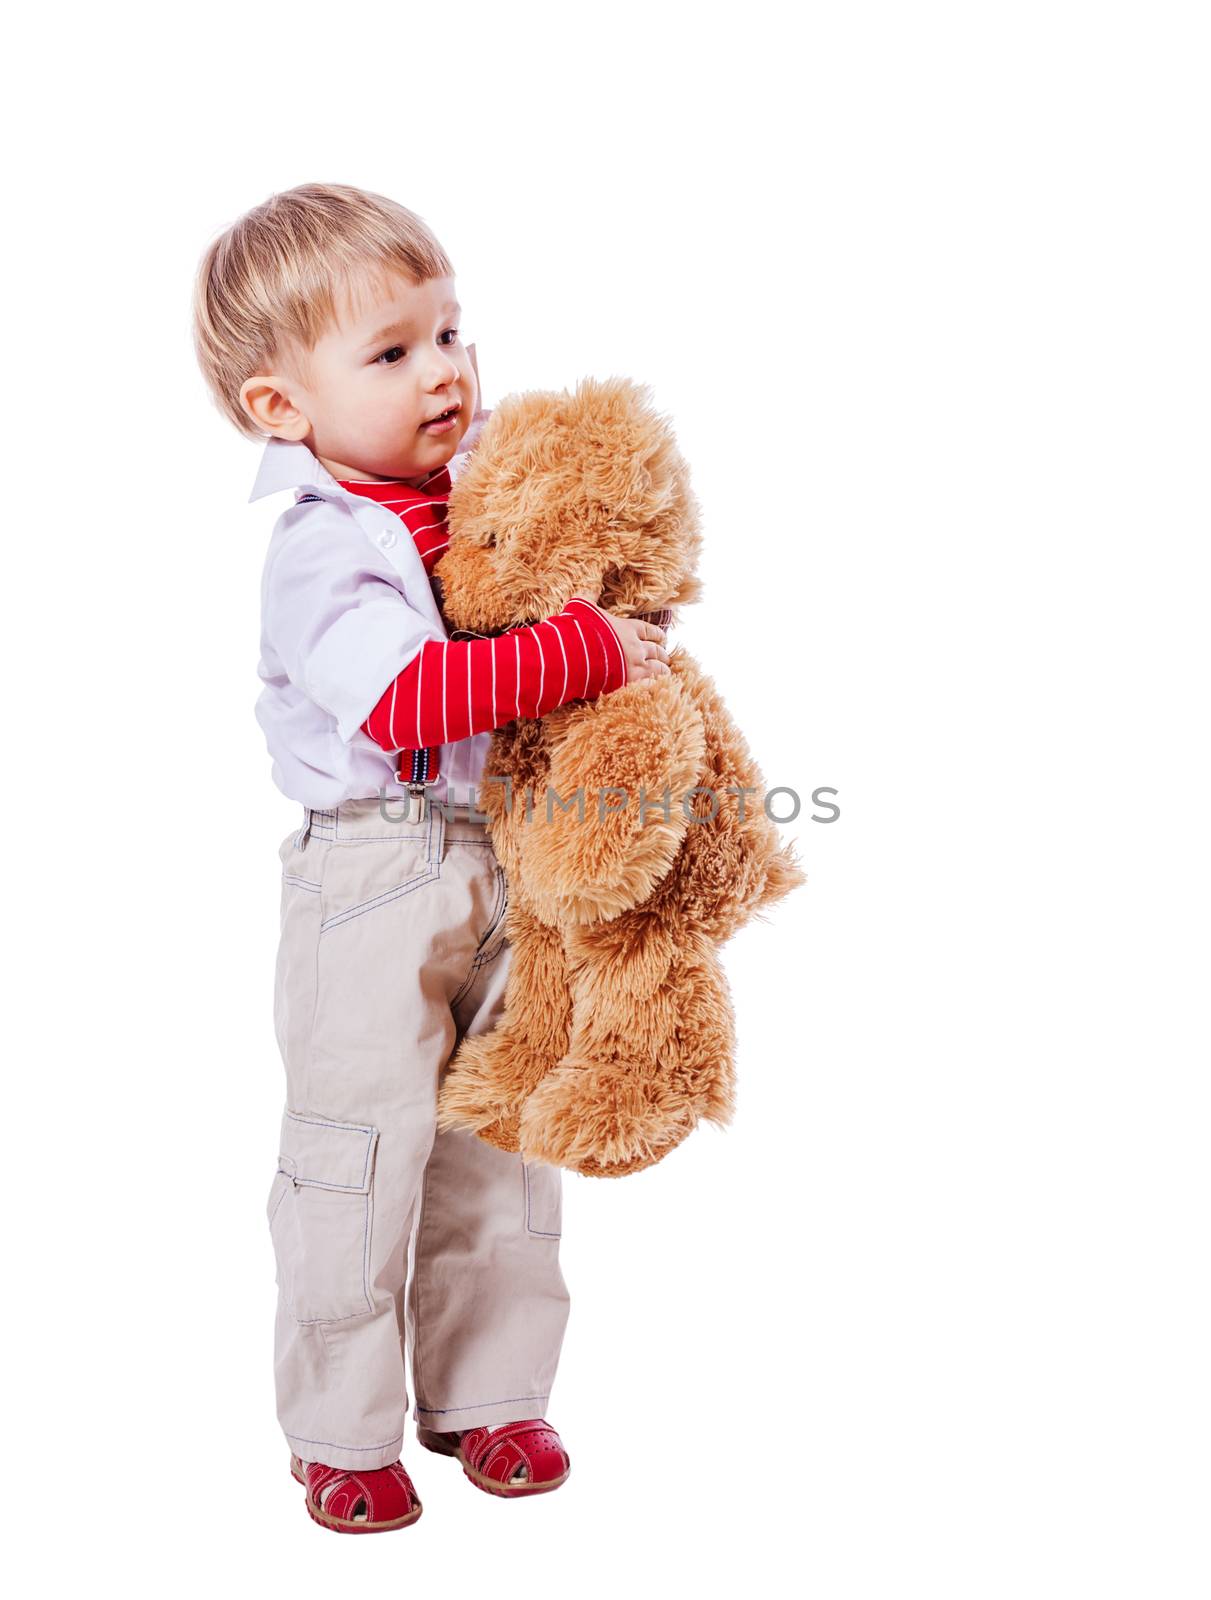 Little blond boy hugging bear toy standing isolated on white